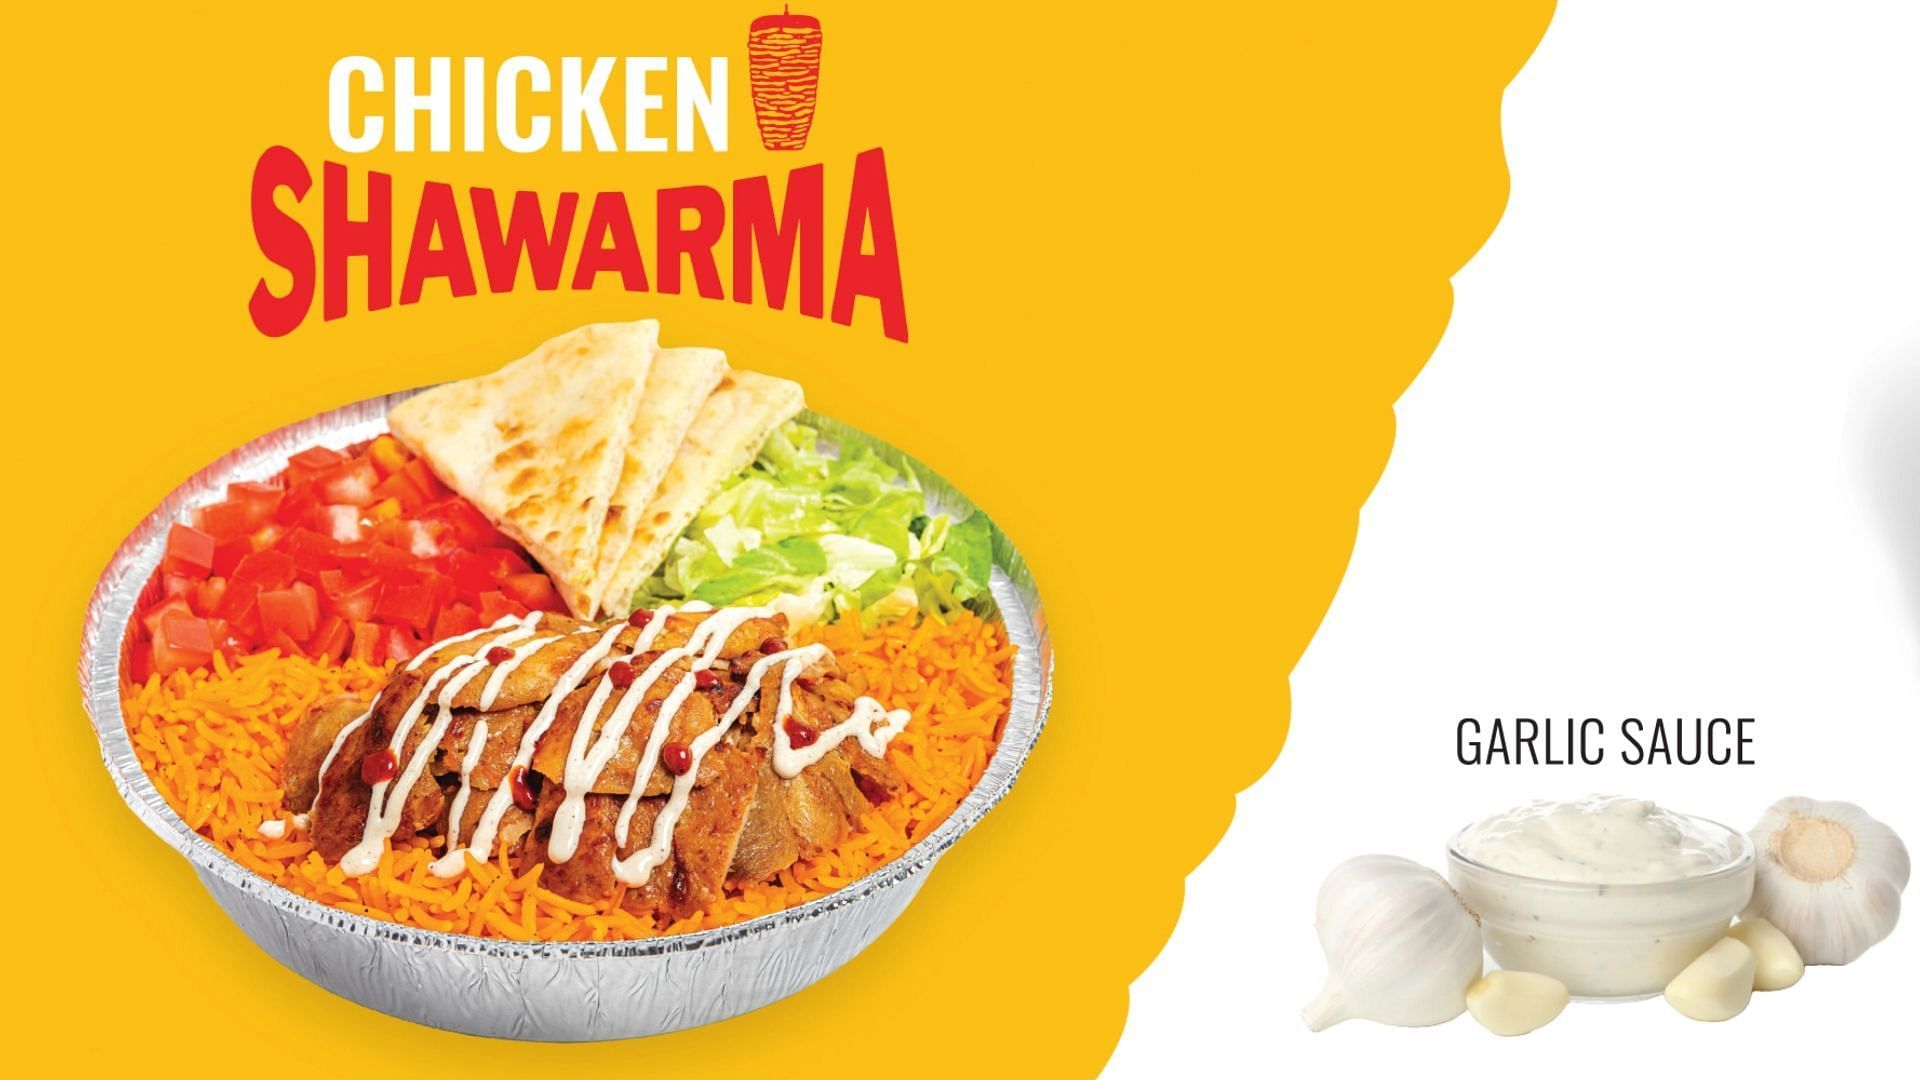 the Chicken Shawarma Platter comes with a free side of spicy garlic sauce (Image via The Halal Guys)